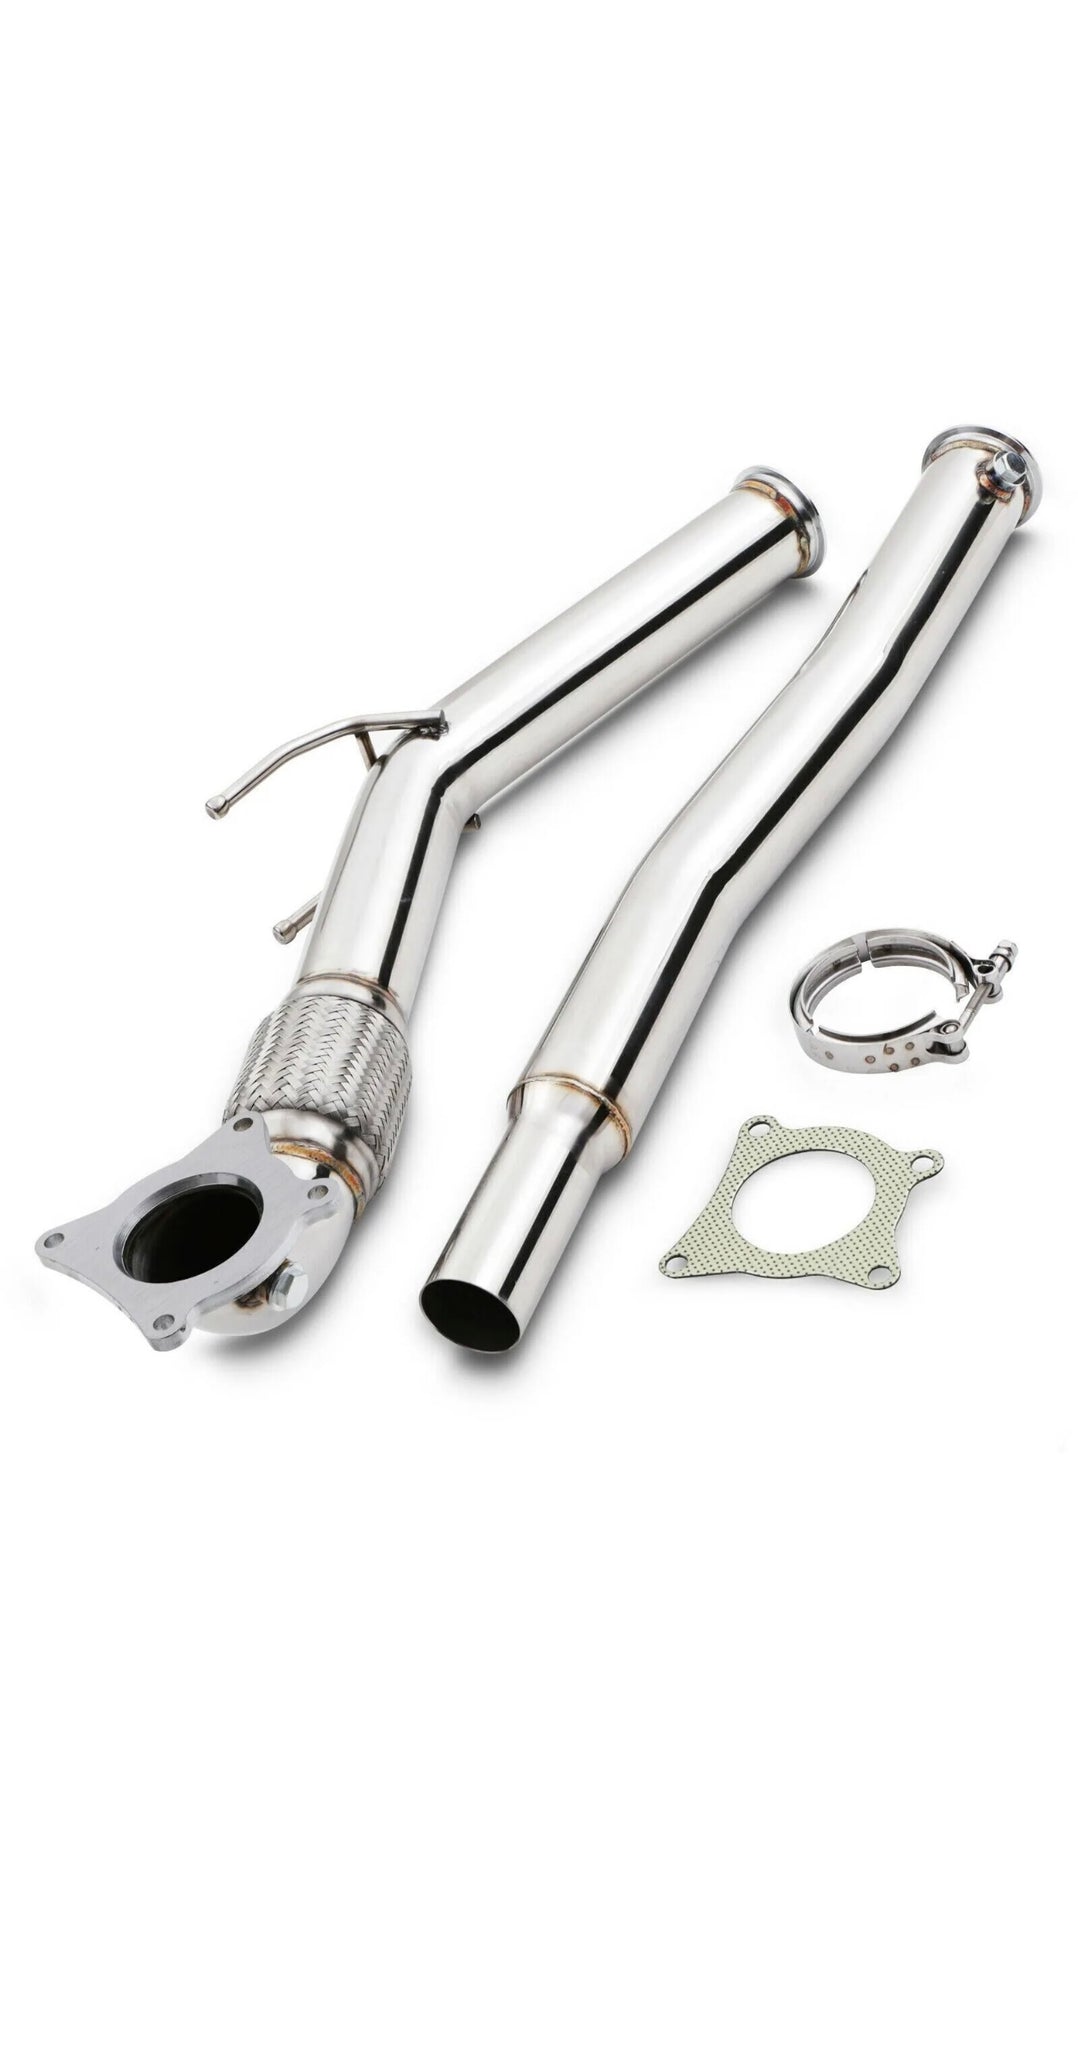 Stainless Decat Downpipe Suit For VW Golf MK5 MK6 GTI Audi A3 8P 2.0T 1.8T Exhaust